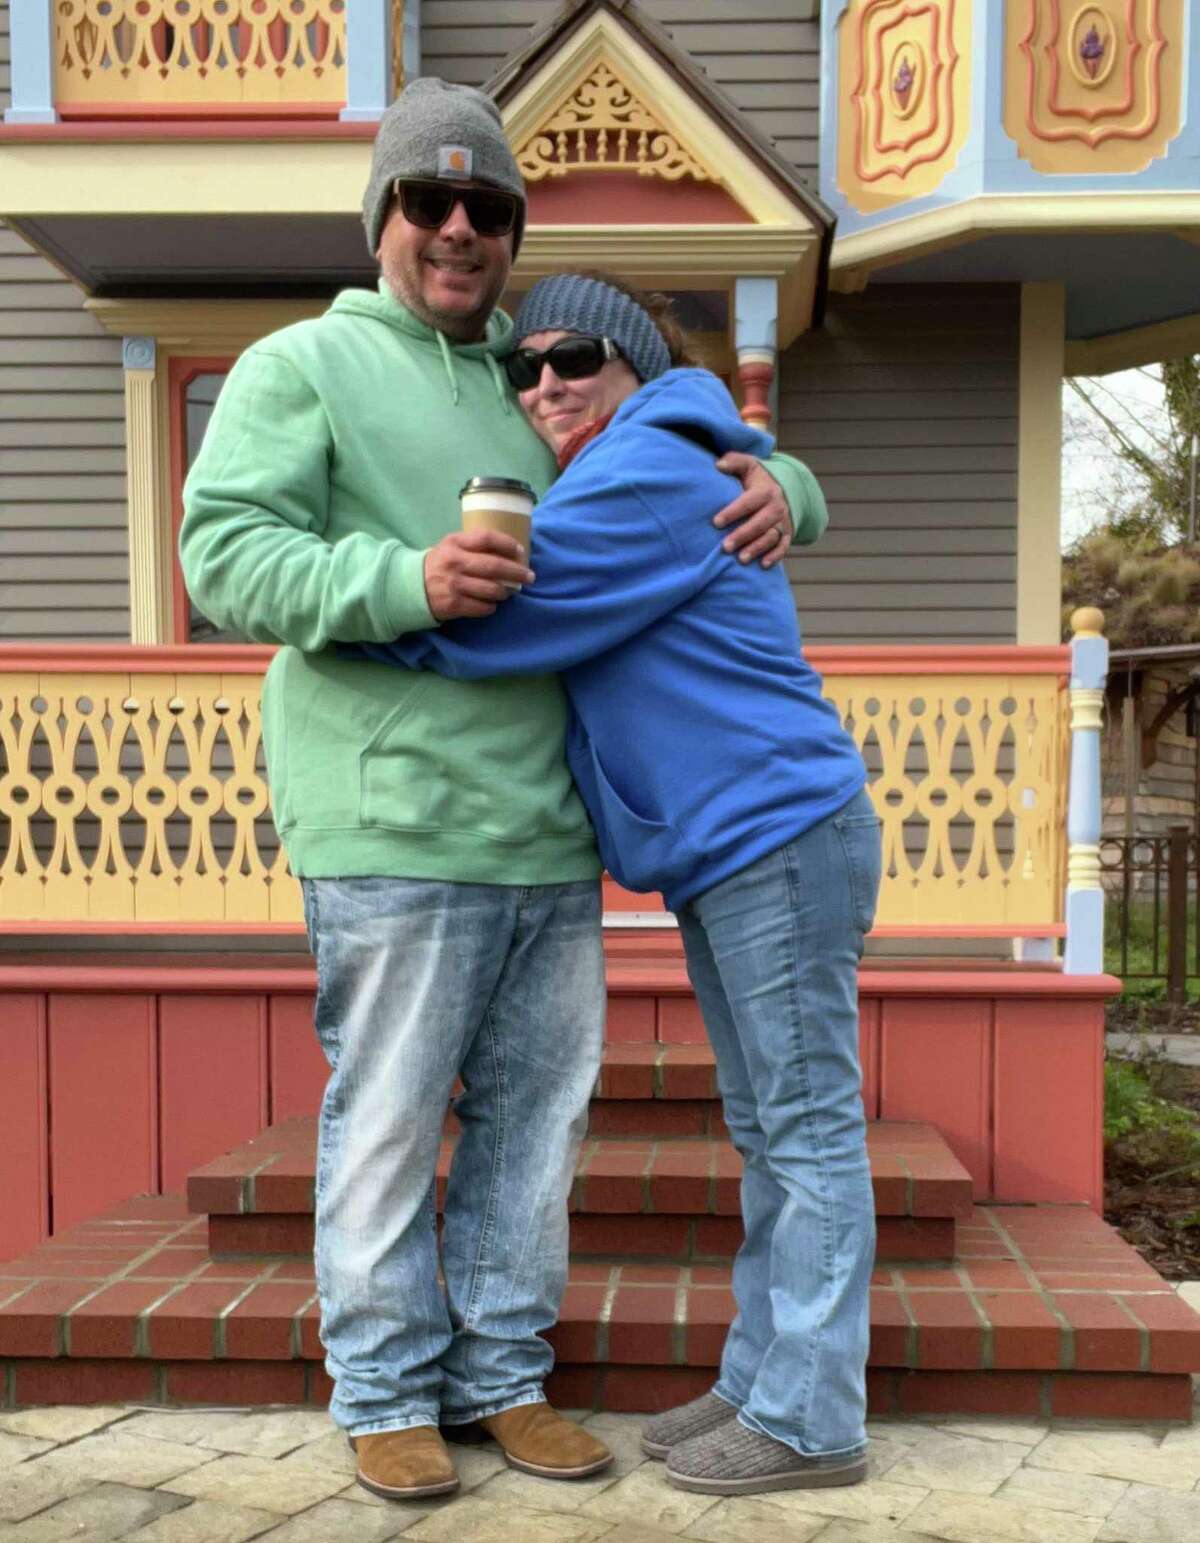 Peter and Larkin O’Leary pose in front of The Gingerbreak Mansion in Ferndale, where they were celebrating their 12th anniversary, hours before a 6.4-magnitude earthquake hit off the coast of Humboldt County.